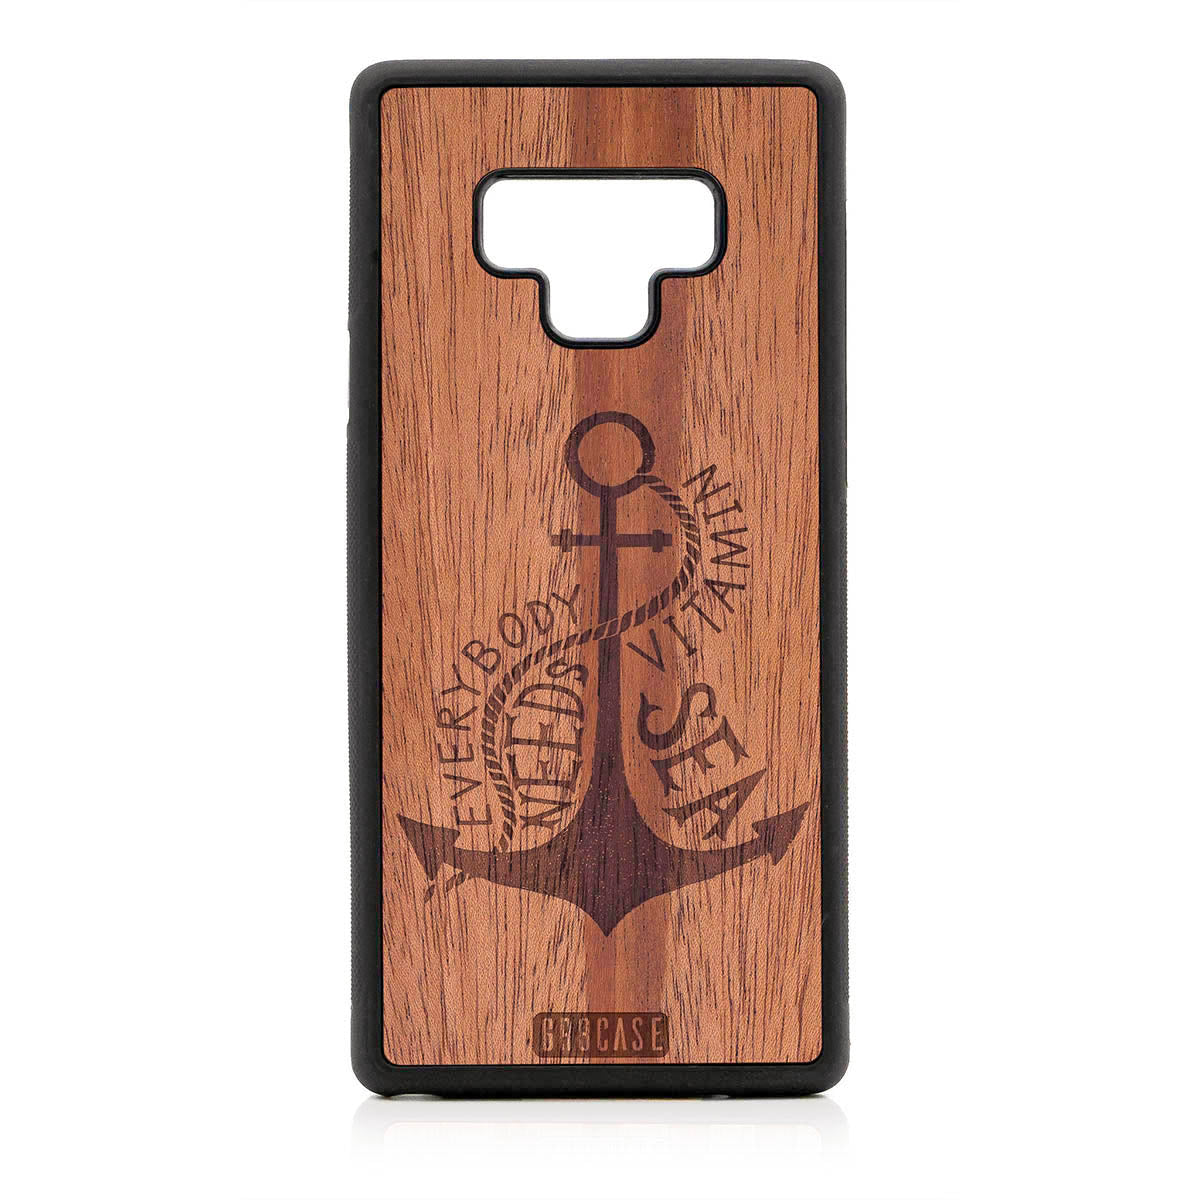 Everybody Needs Vitamin Sea (Anchor) Design Wood Case For Samsung Galaxy Note 9 by GR8CASE